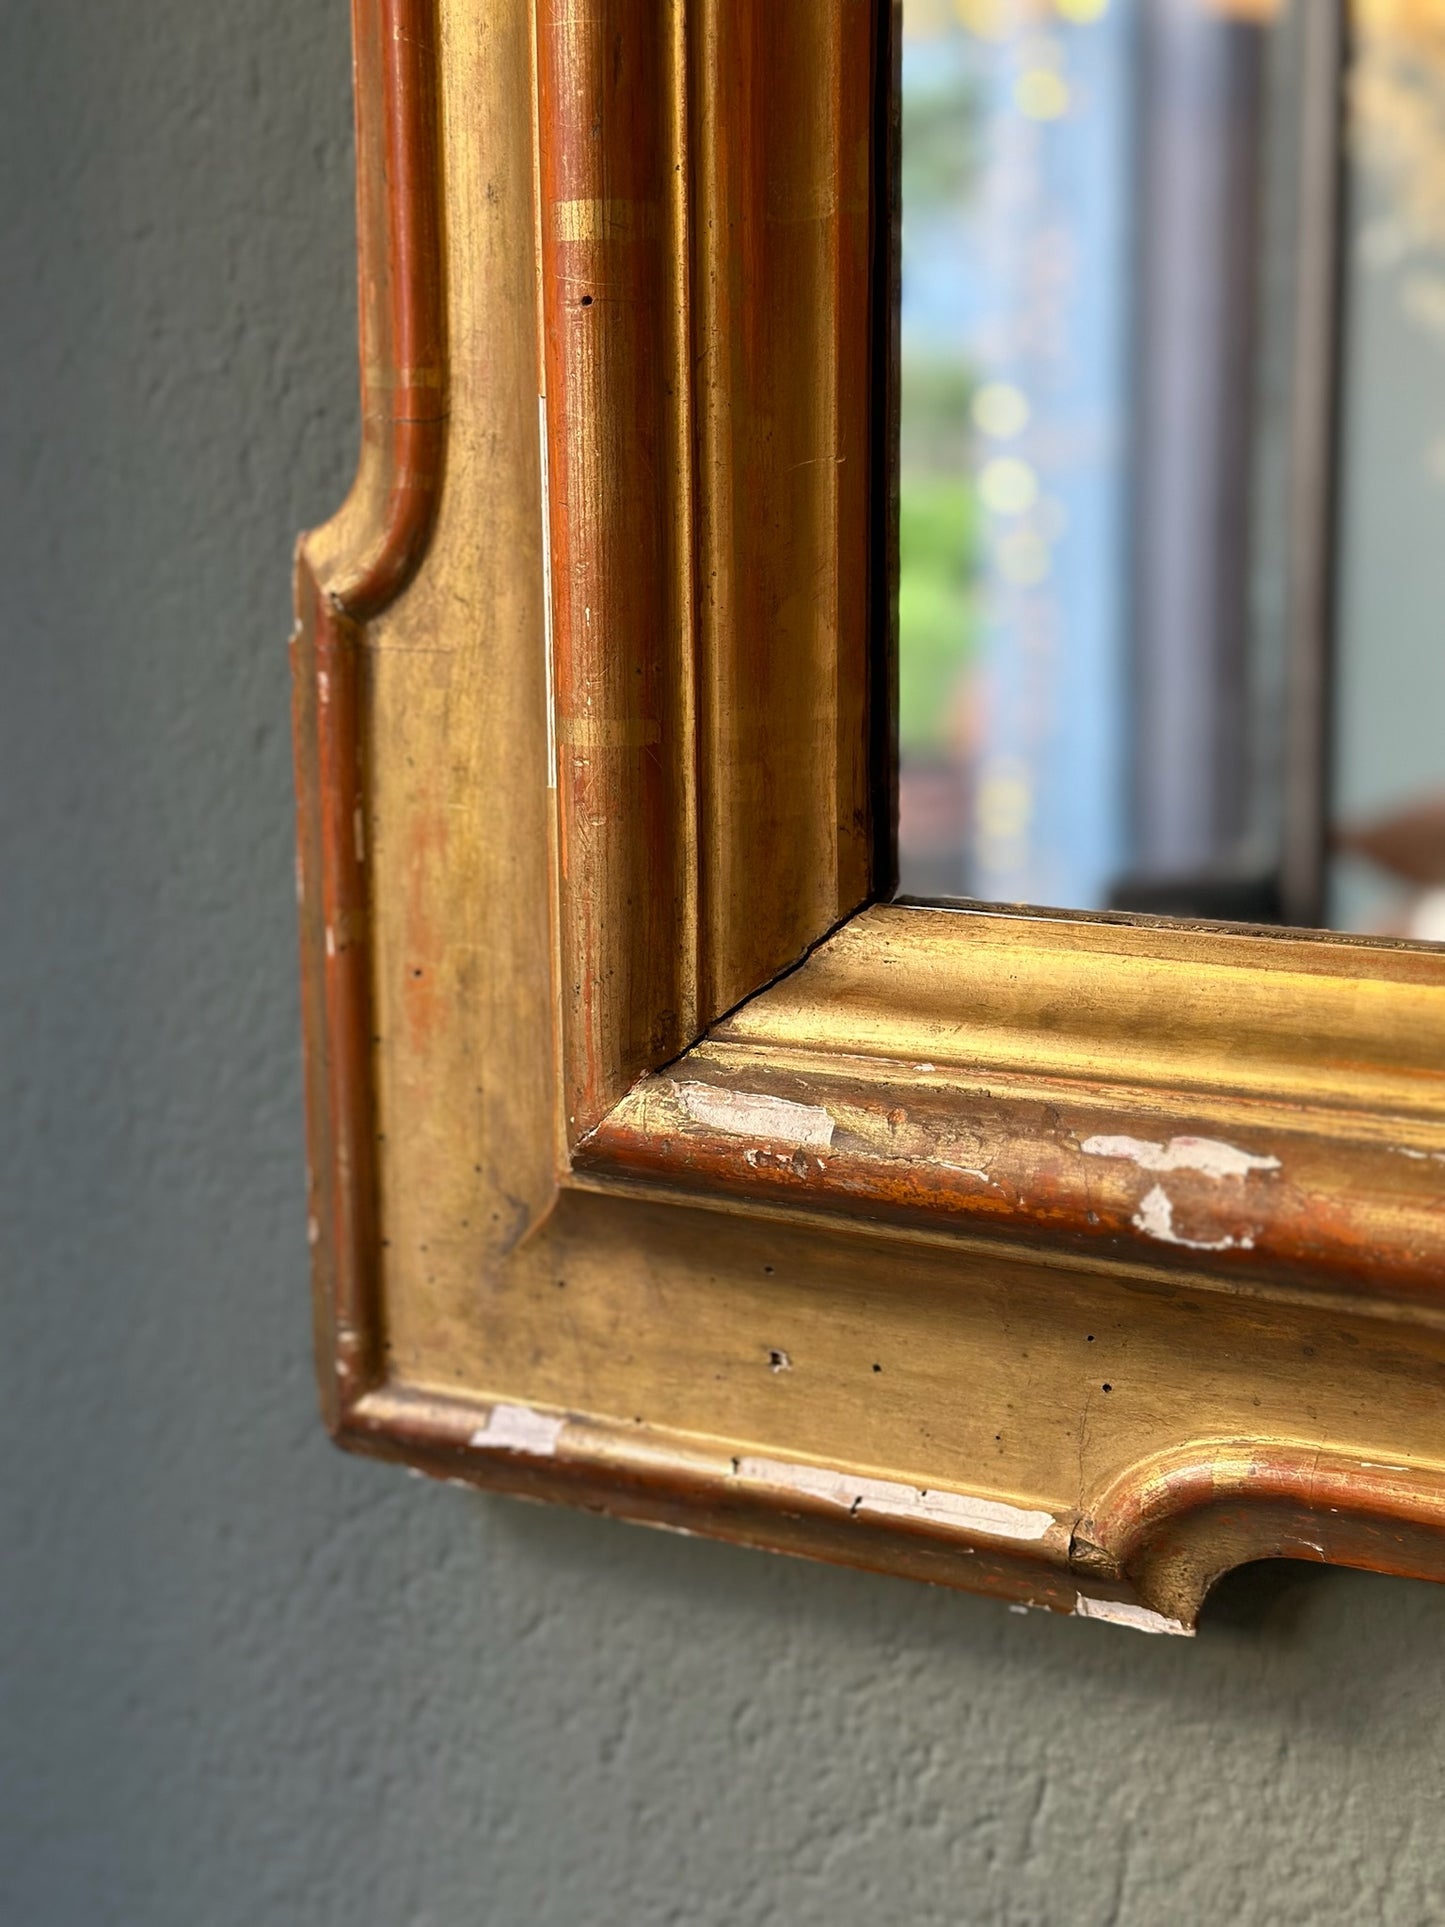 Antique 'Tray' Mirror With Golden Wood Frame